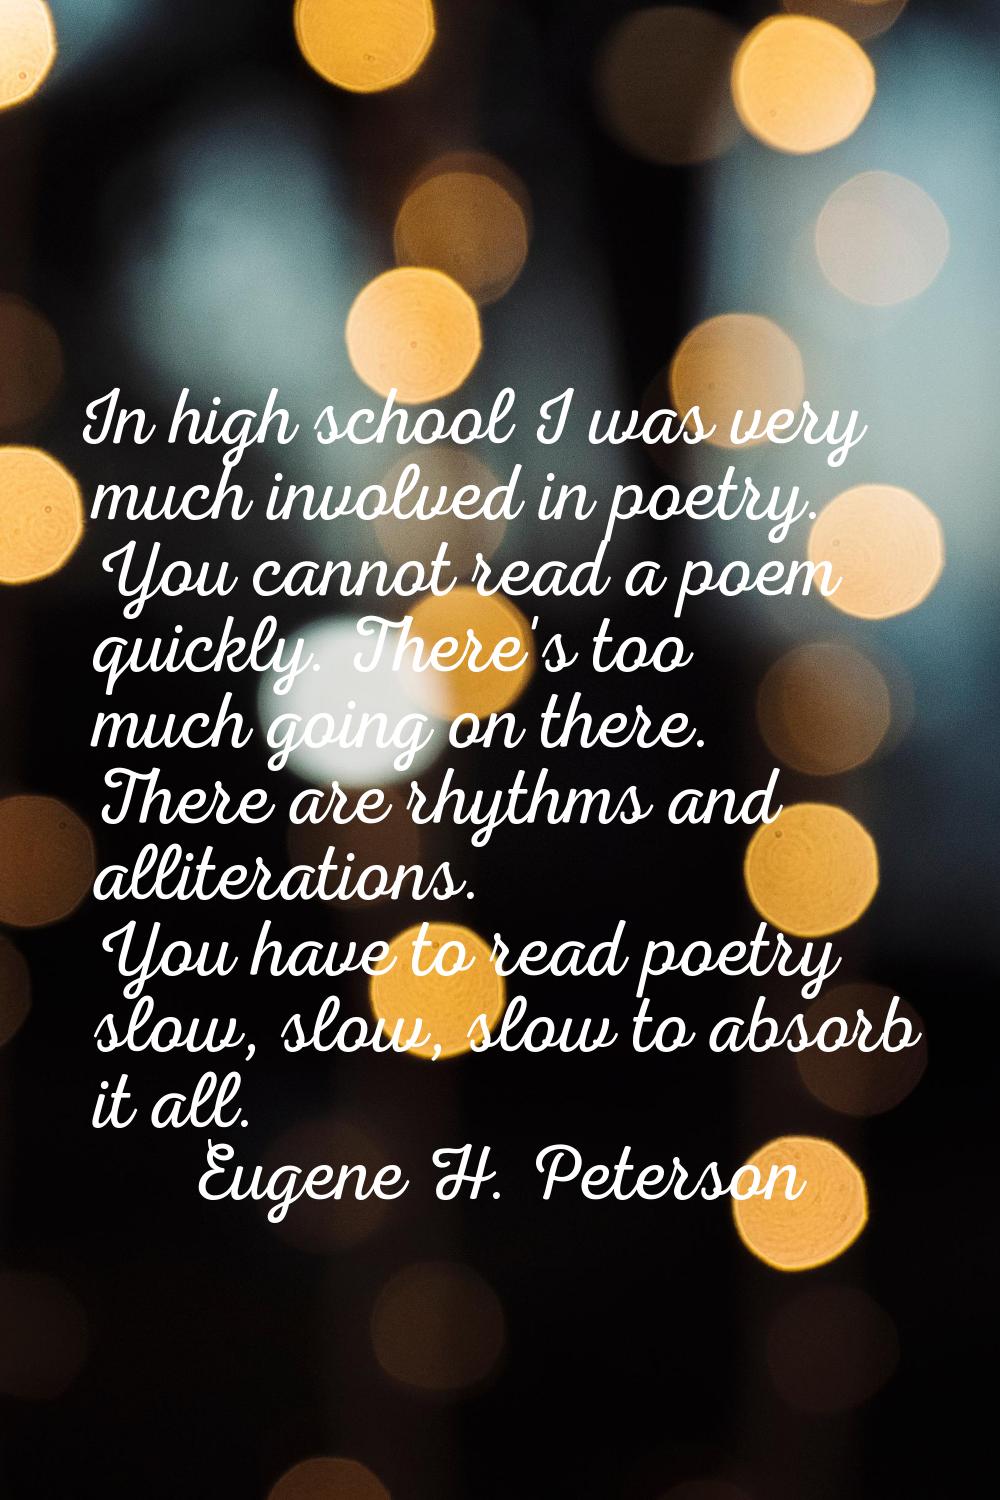 In high school I was very much involved in poetry. You cannot read a poem quickly. There's too much